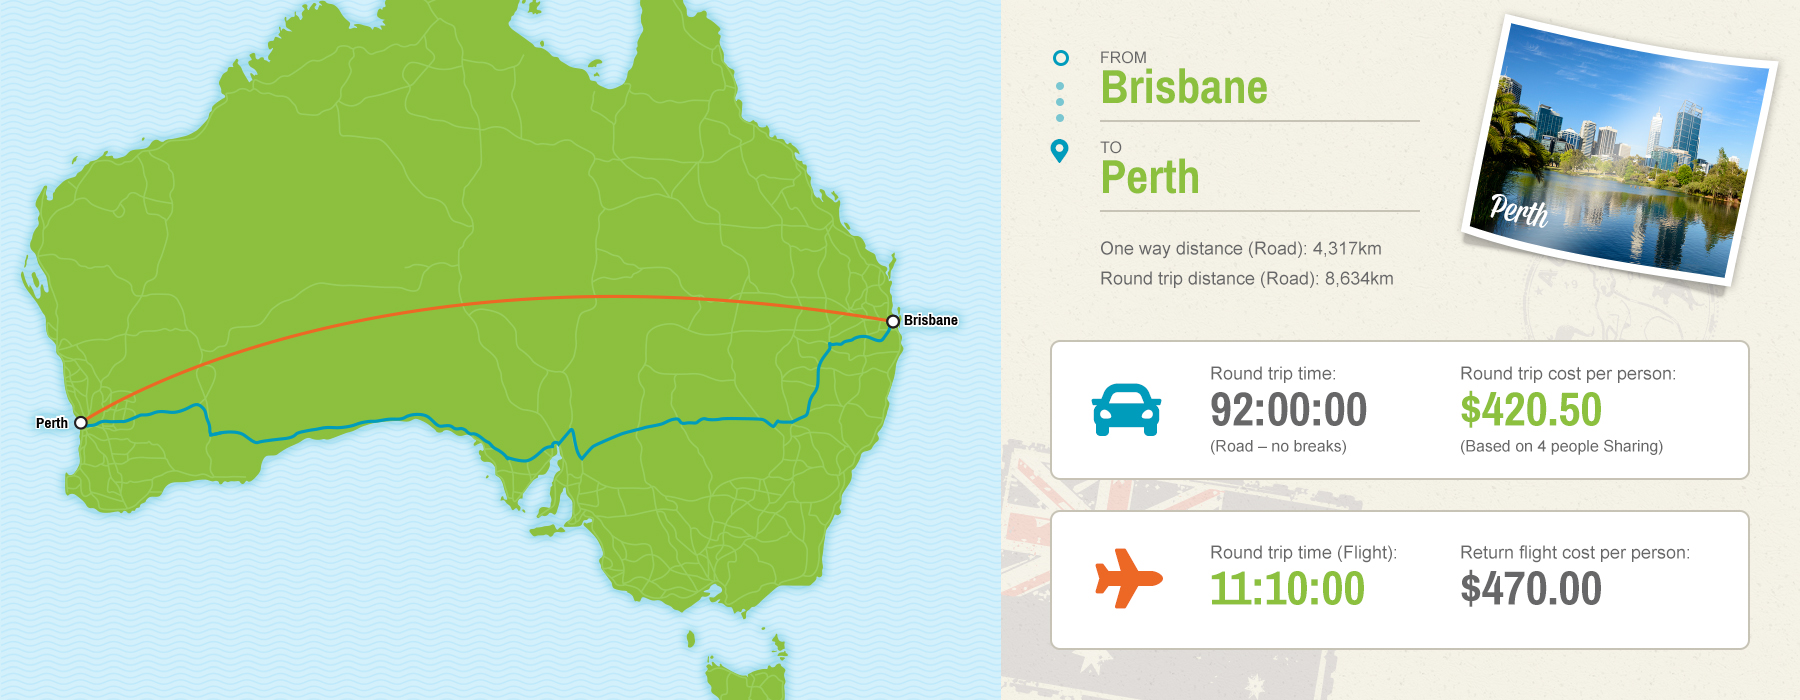 Brisbane to Perth map showing driving vs flying